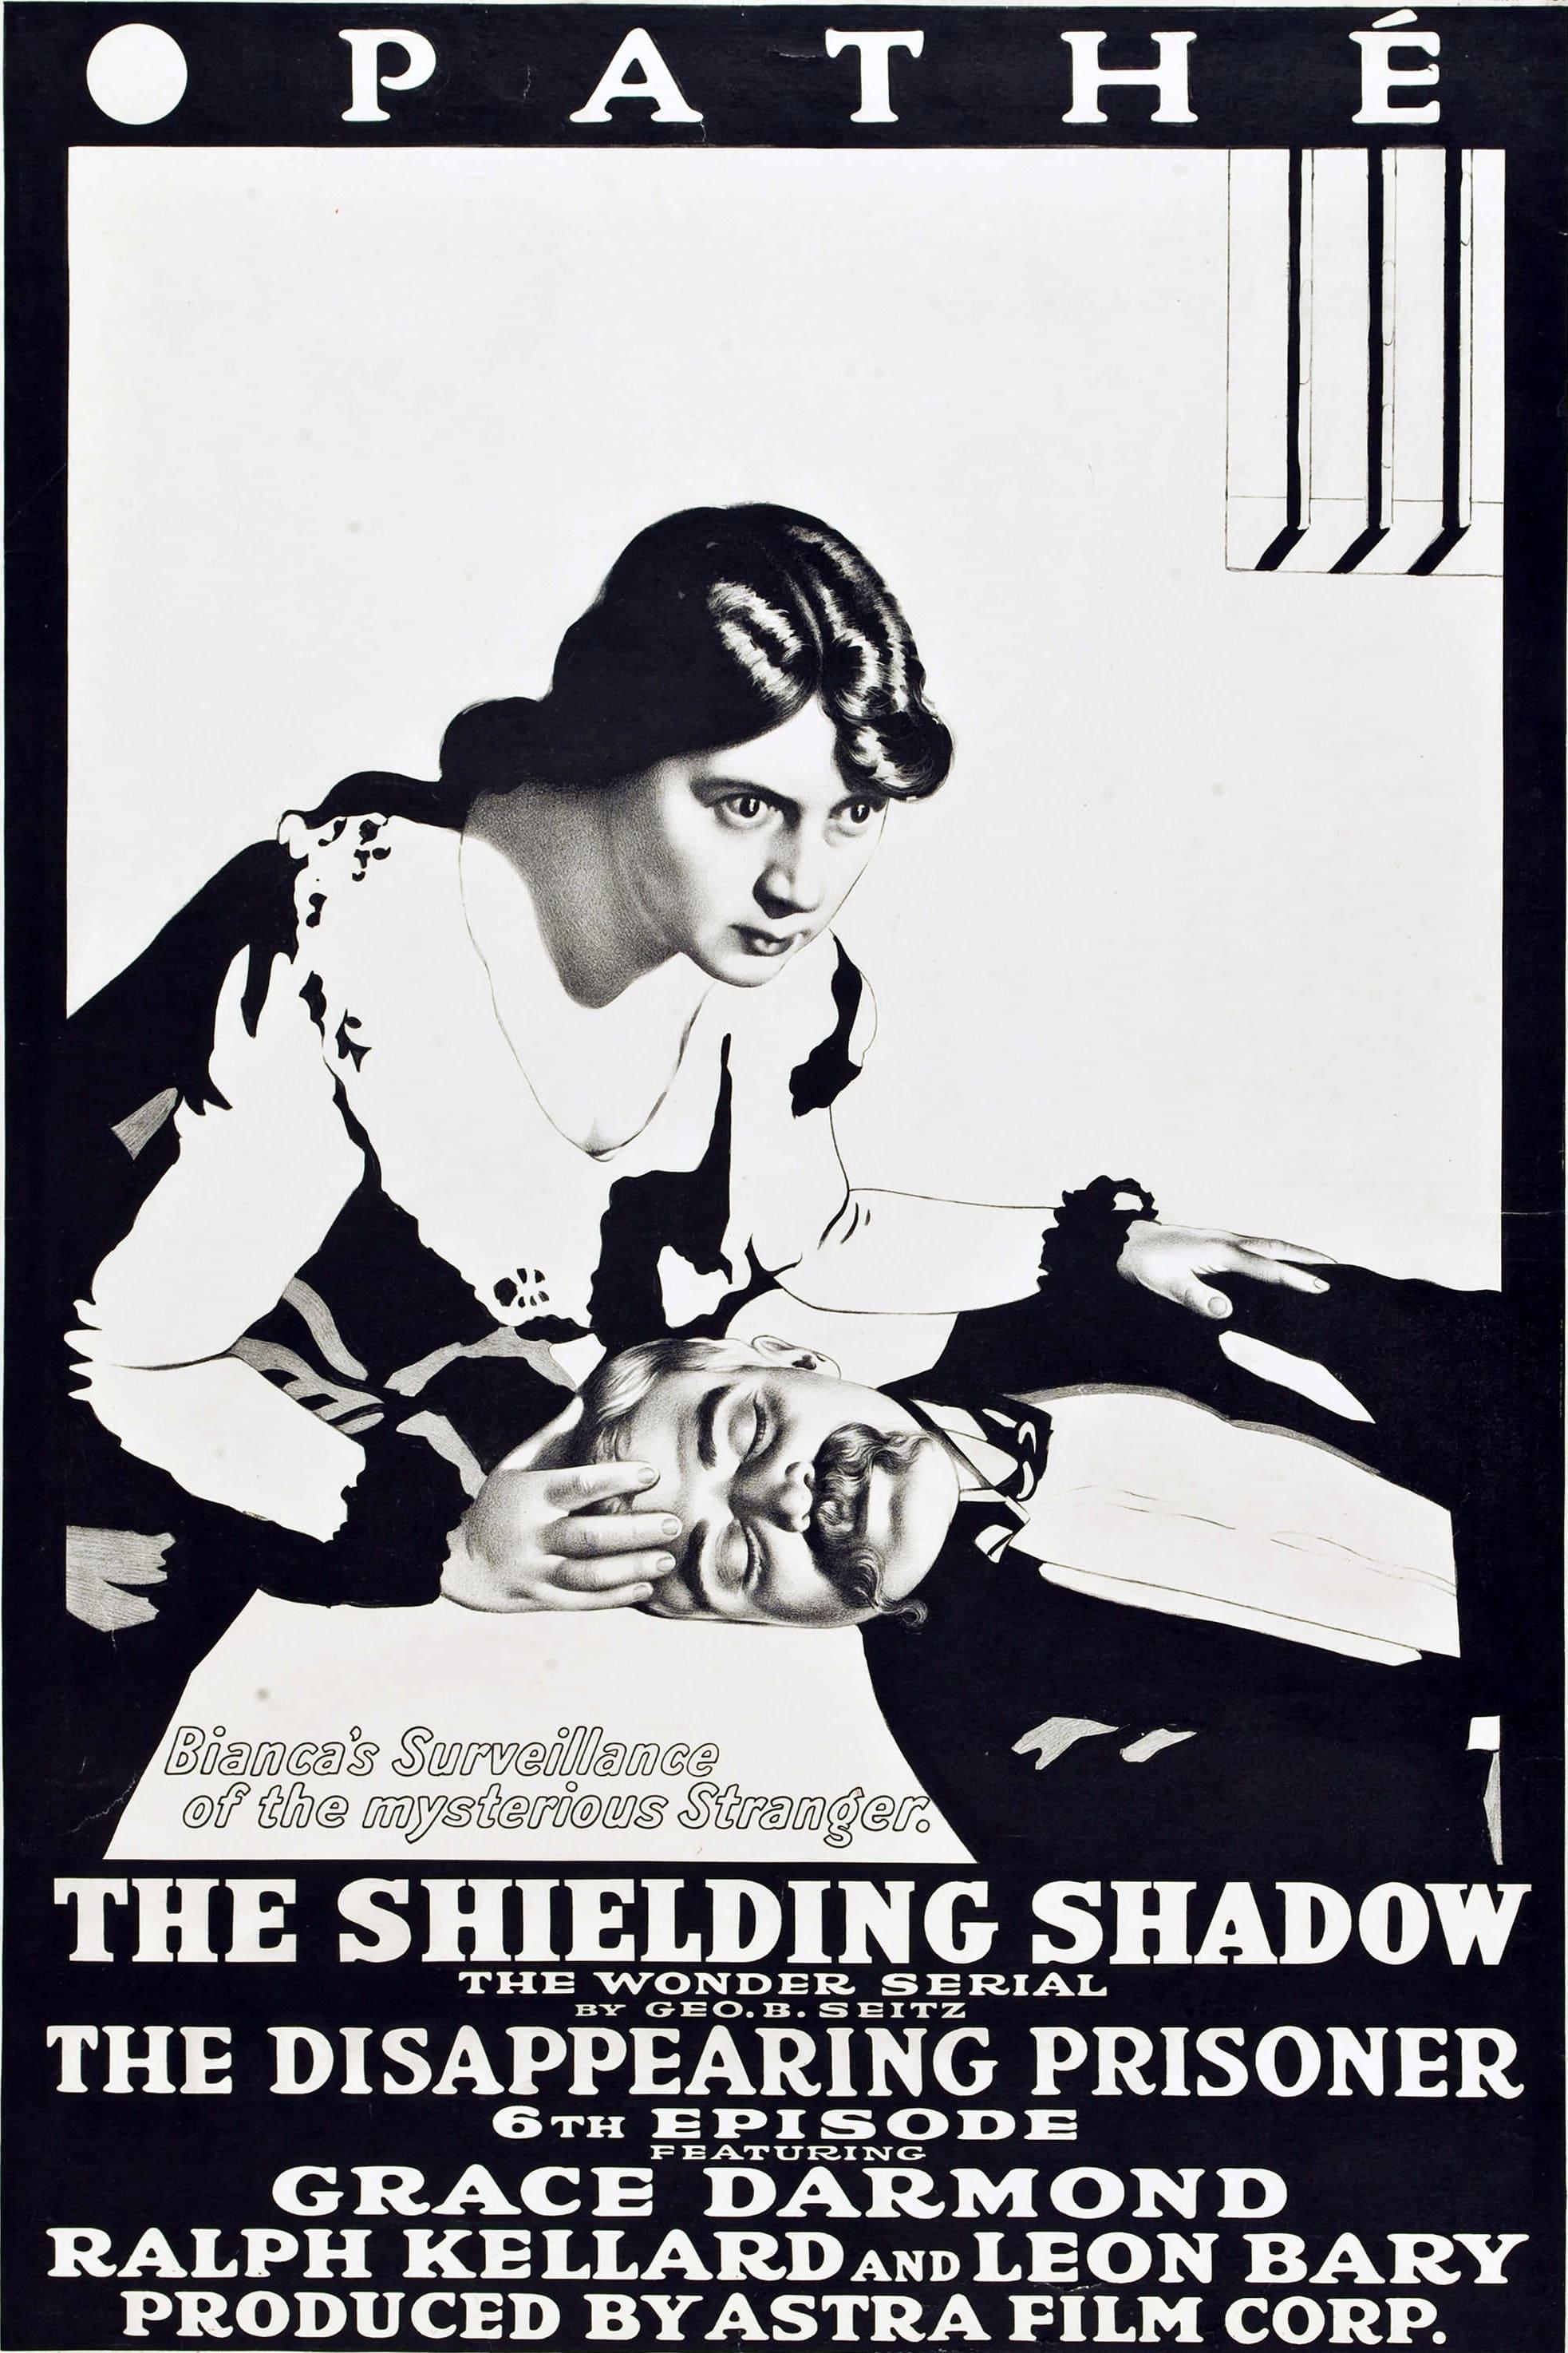 The Shielding Shadow poster